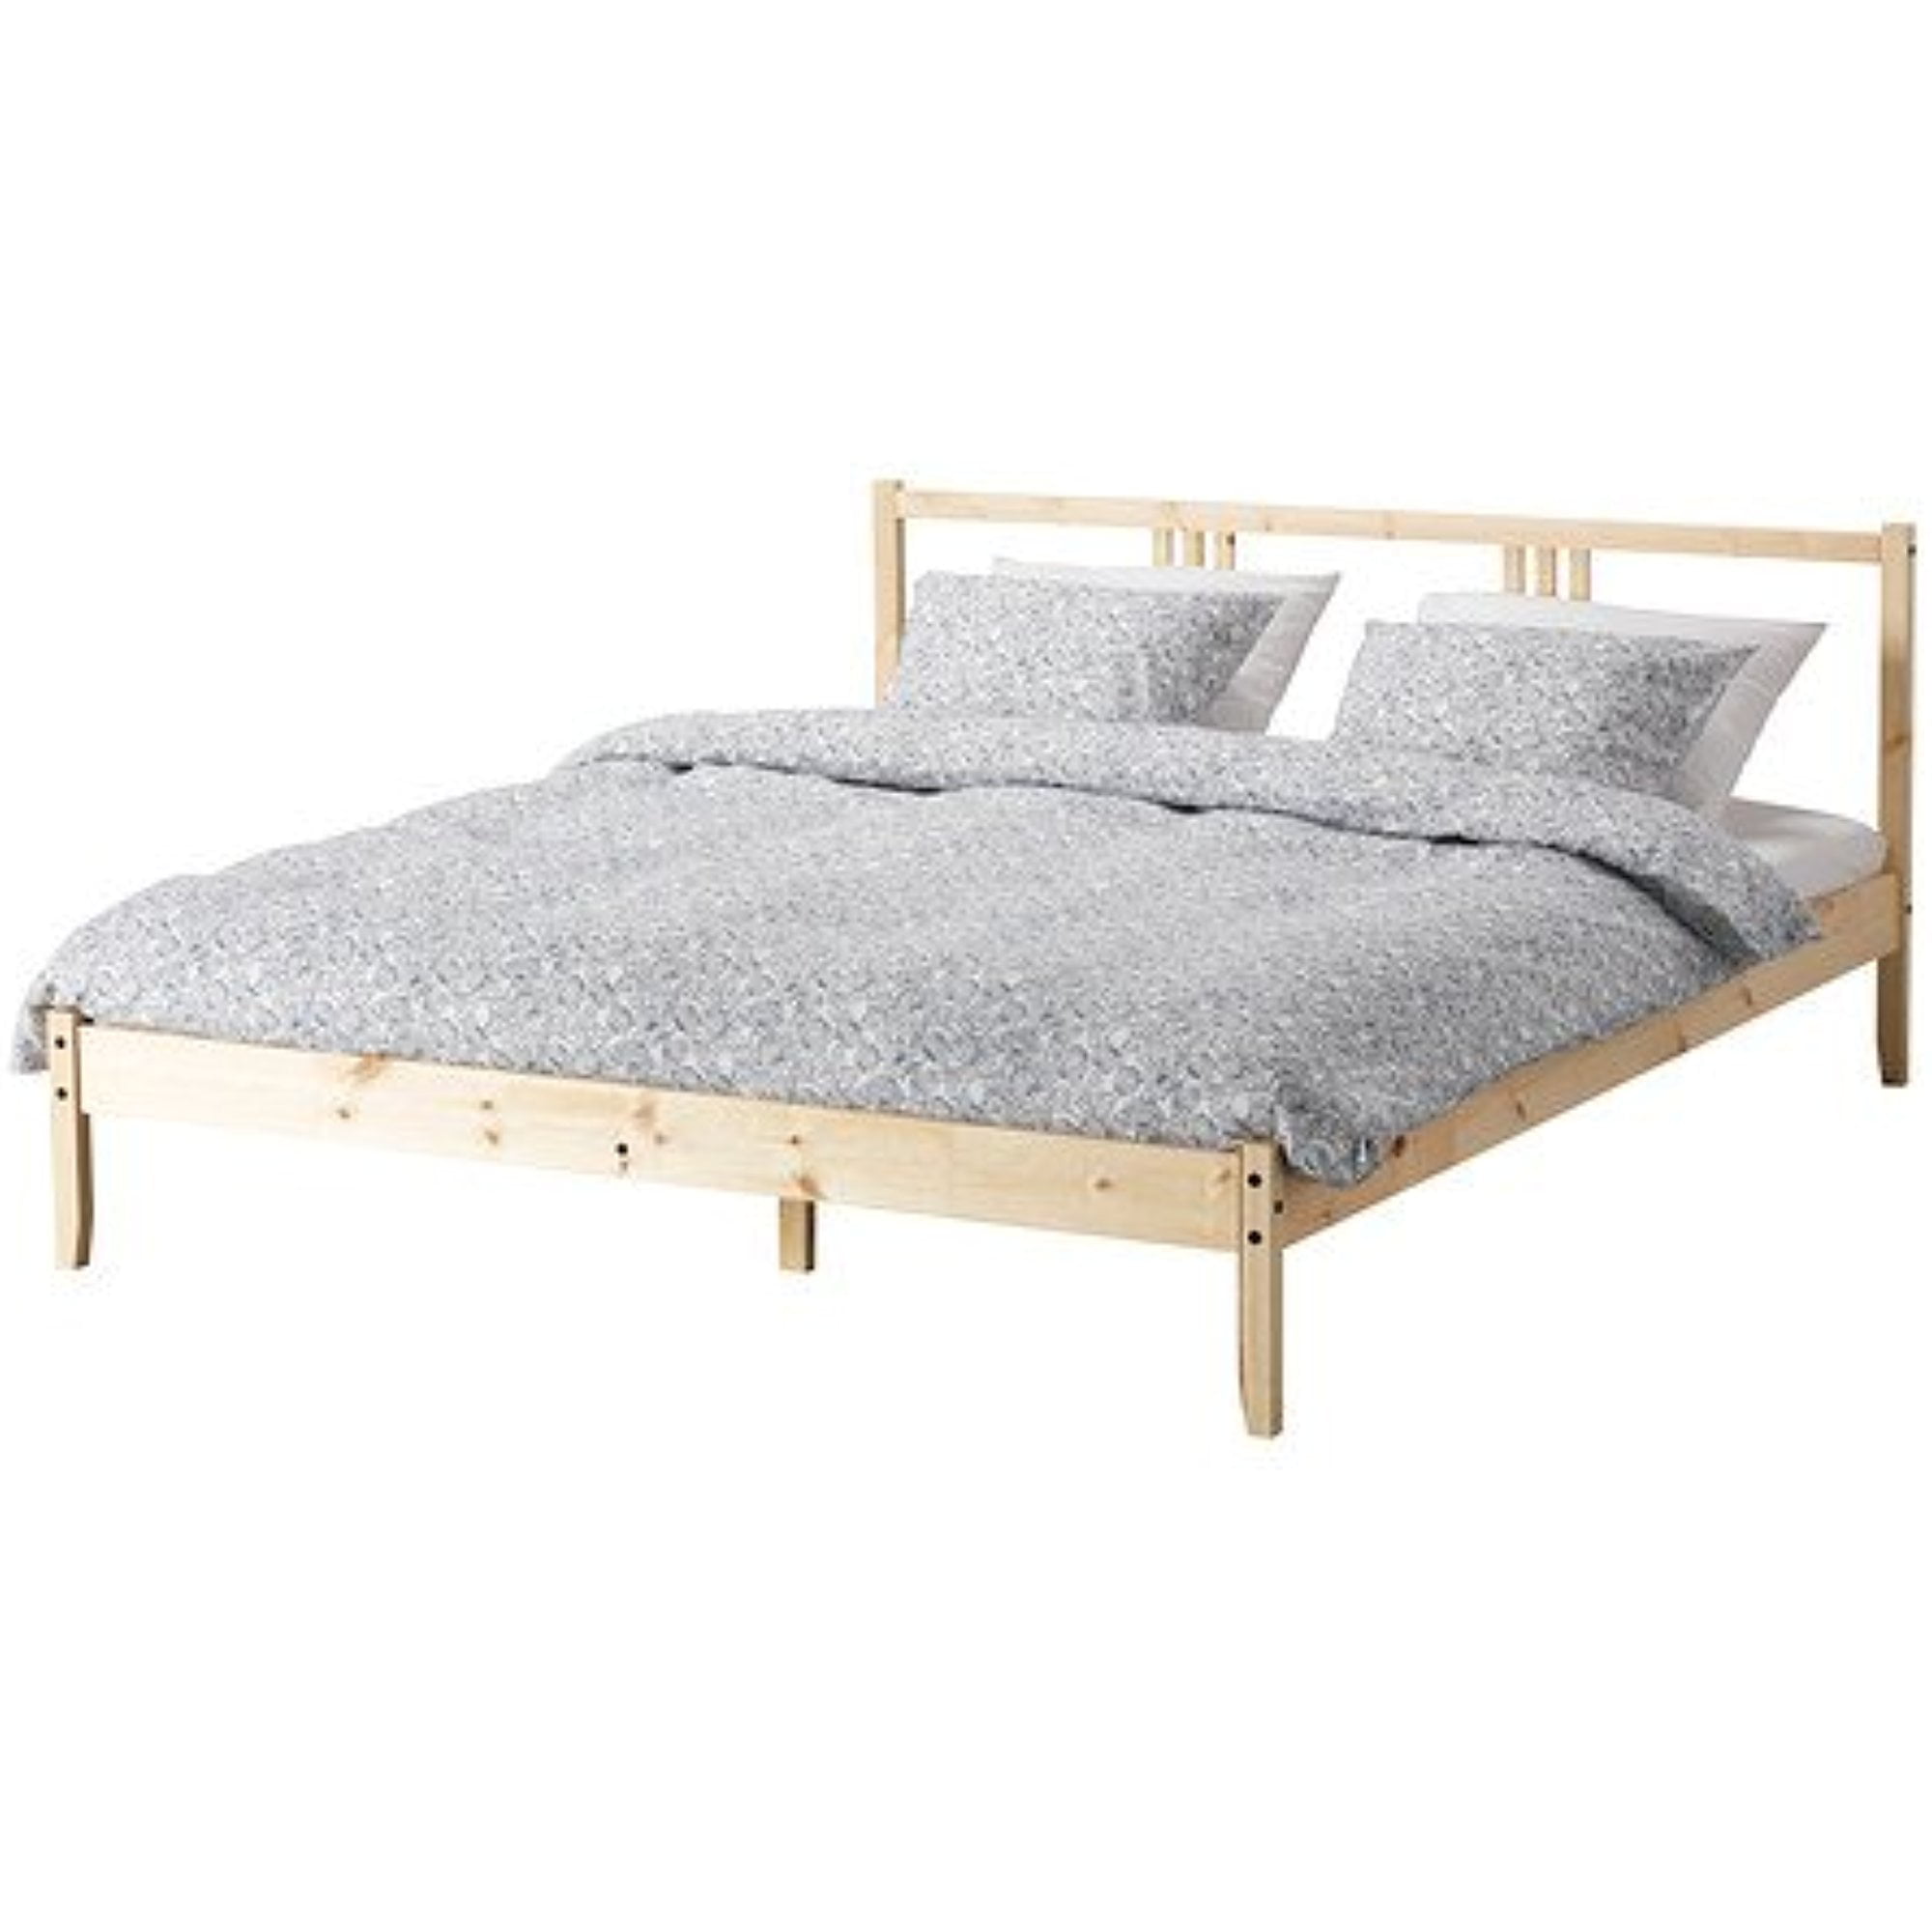 Ikea Full Bed Frame Solid Wood With, Ikea Full Bed Frame No Headboard